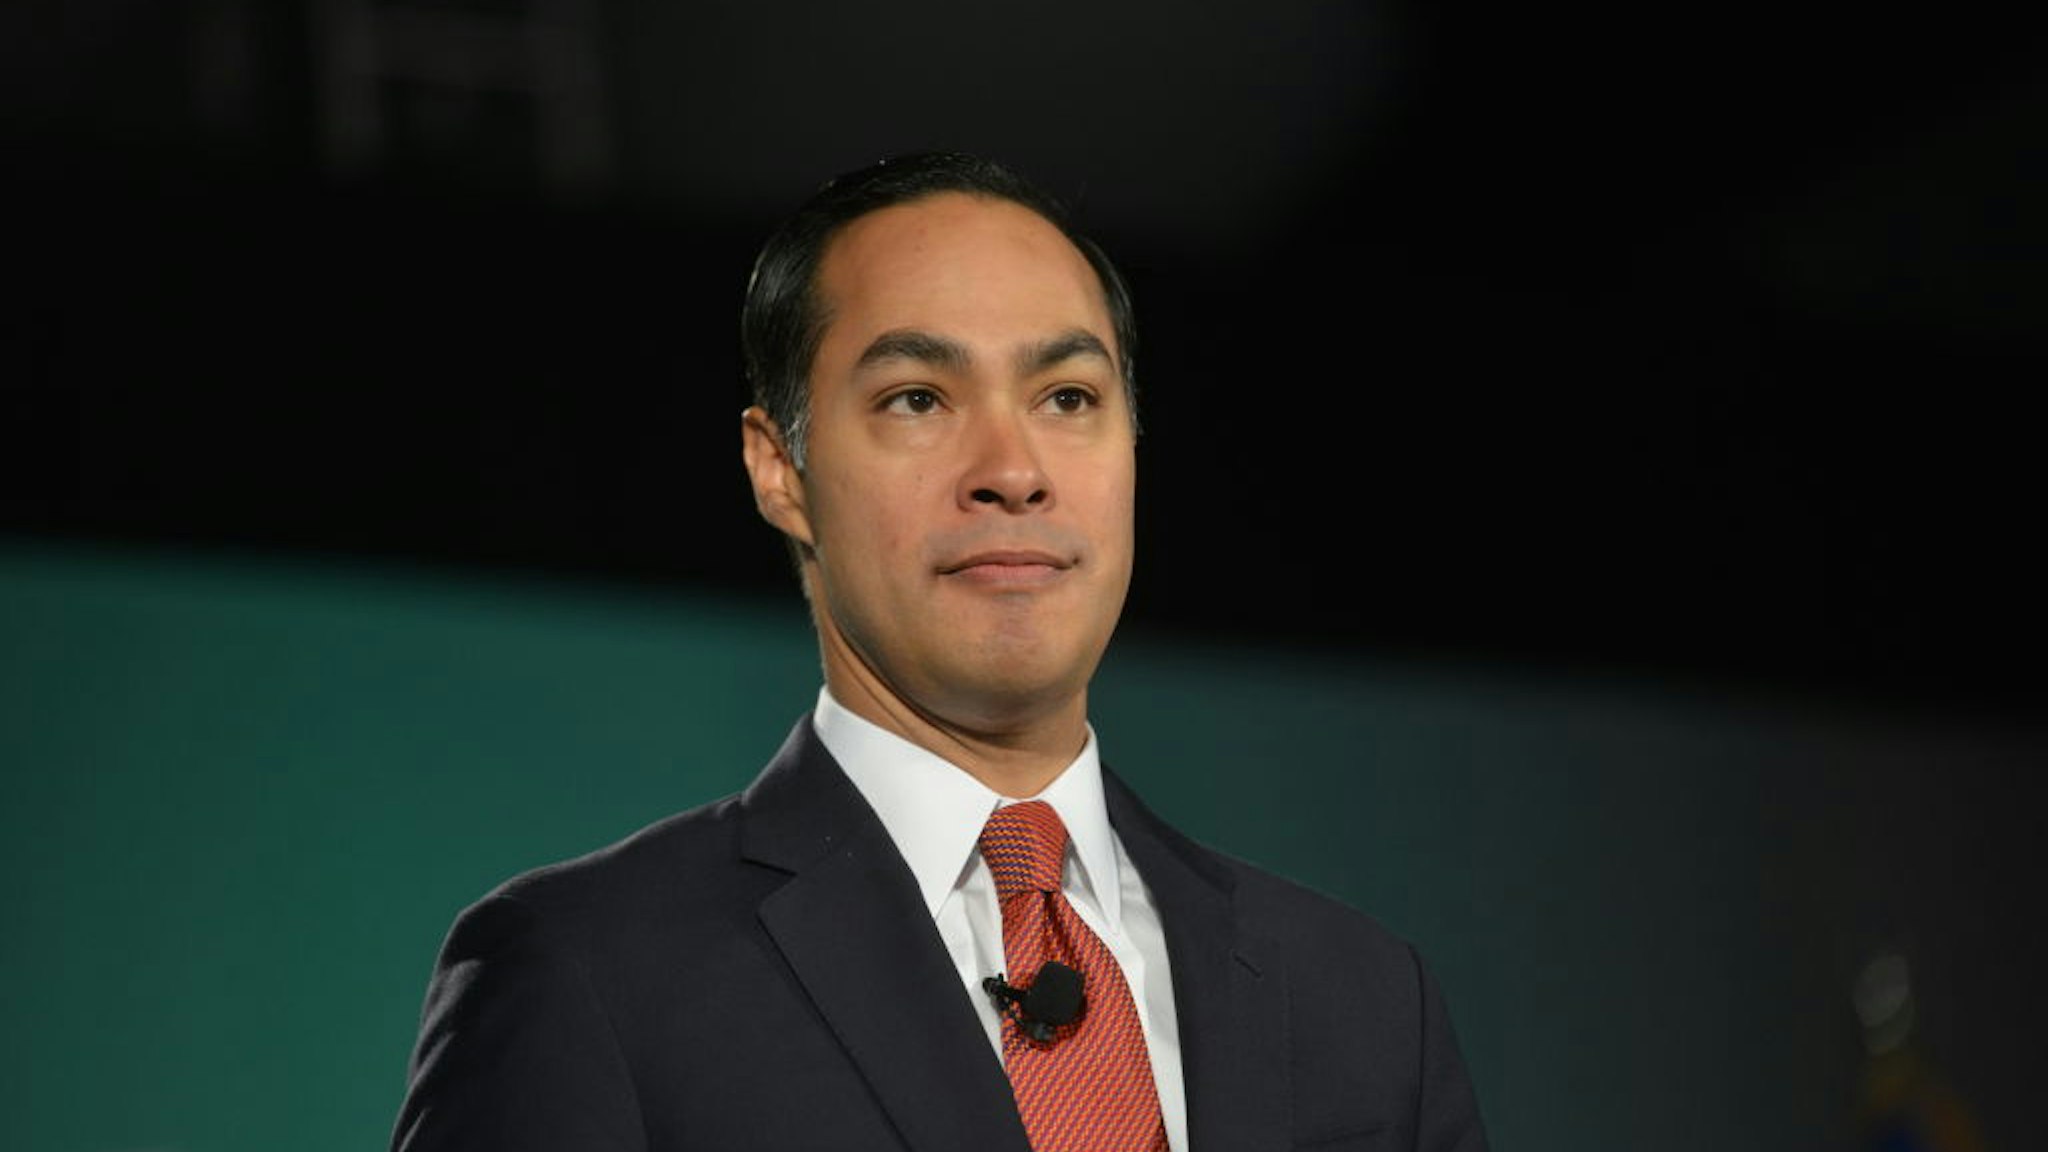 Julian Castro during the American Federation of State, County & Municipal Employees (AFSCME) Public Service Forum